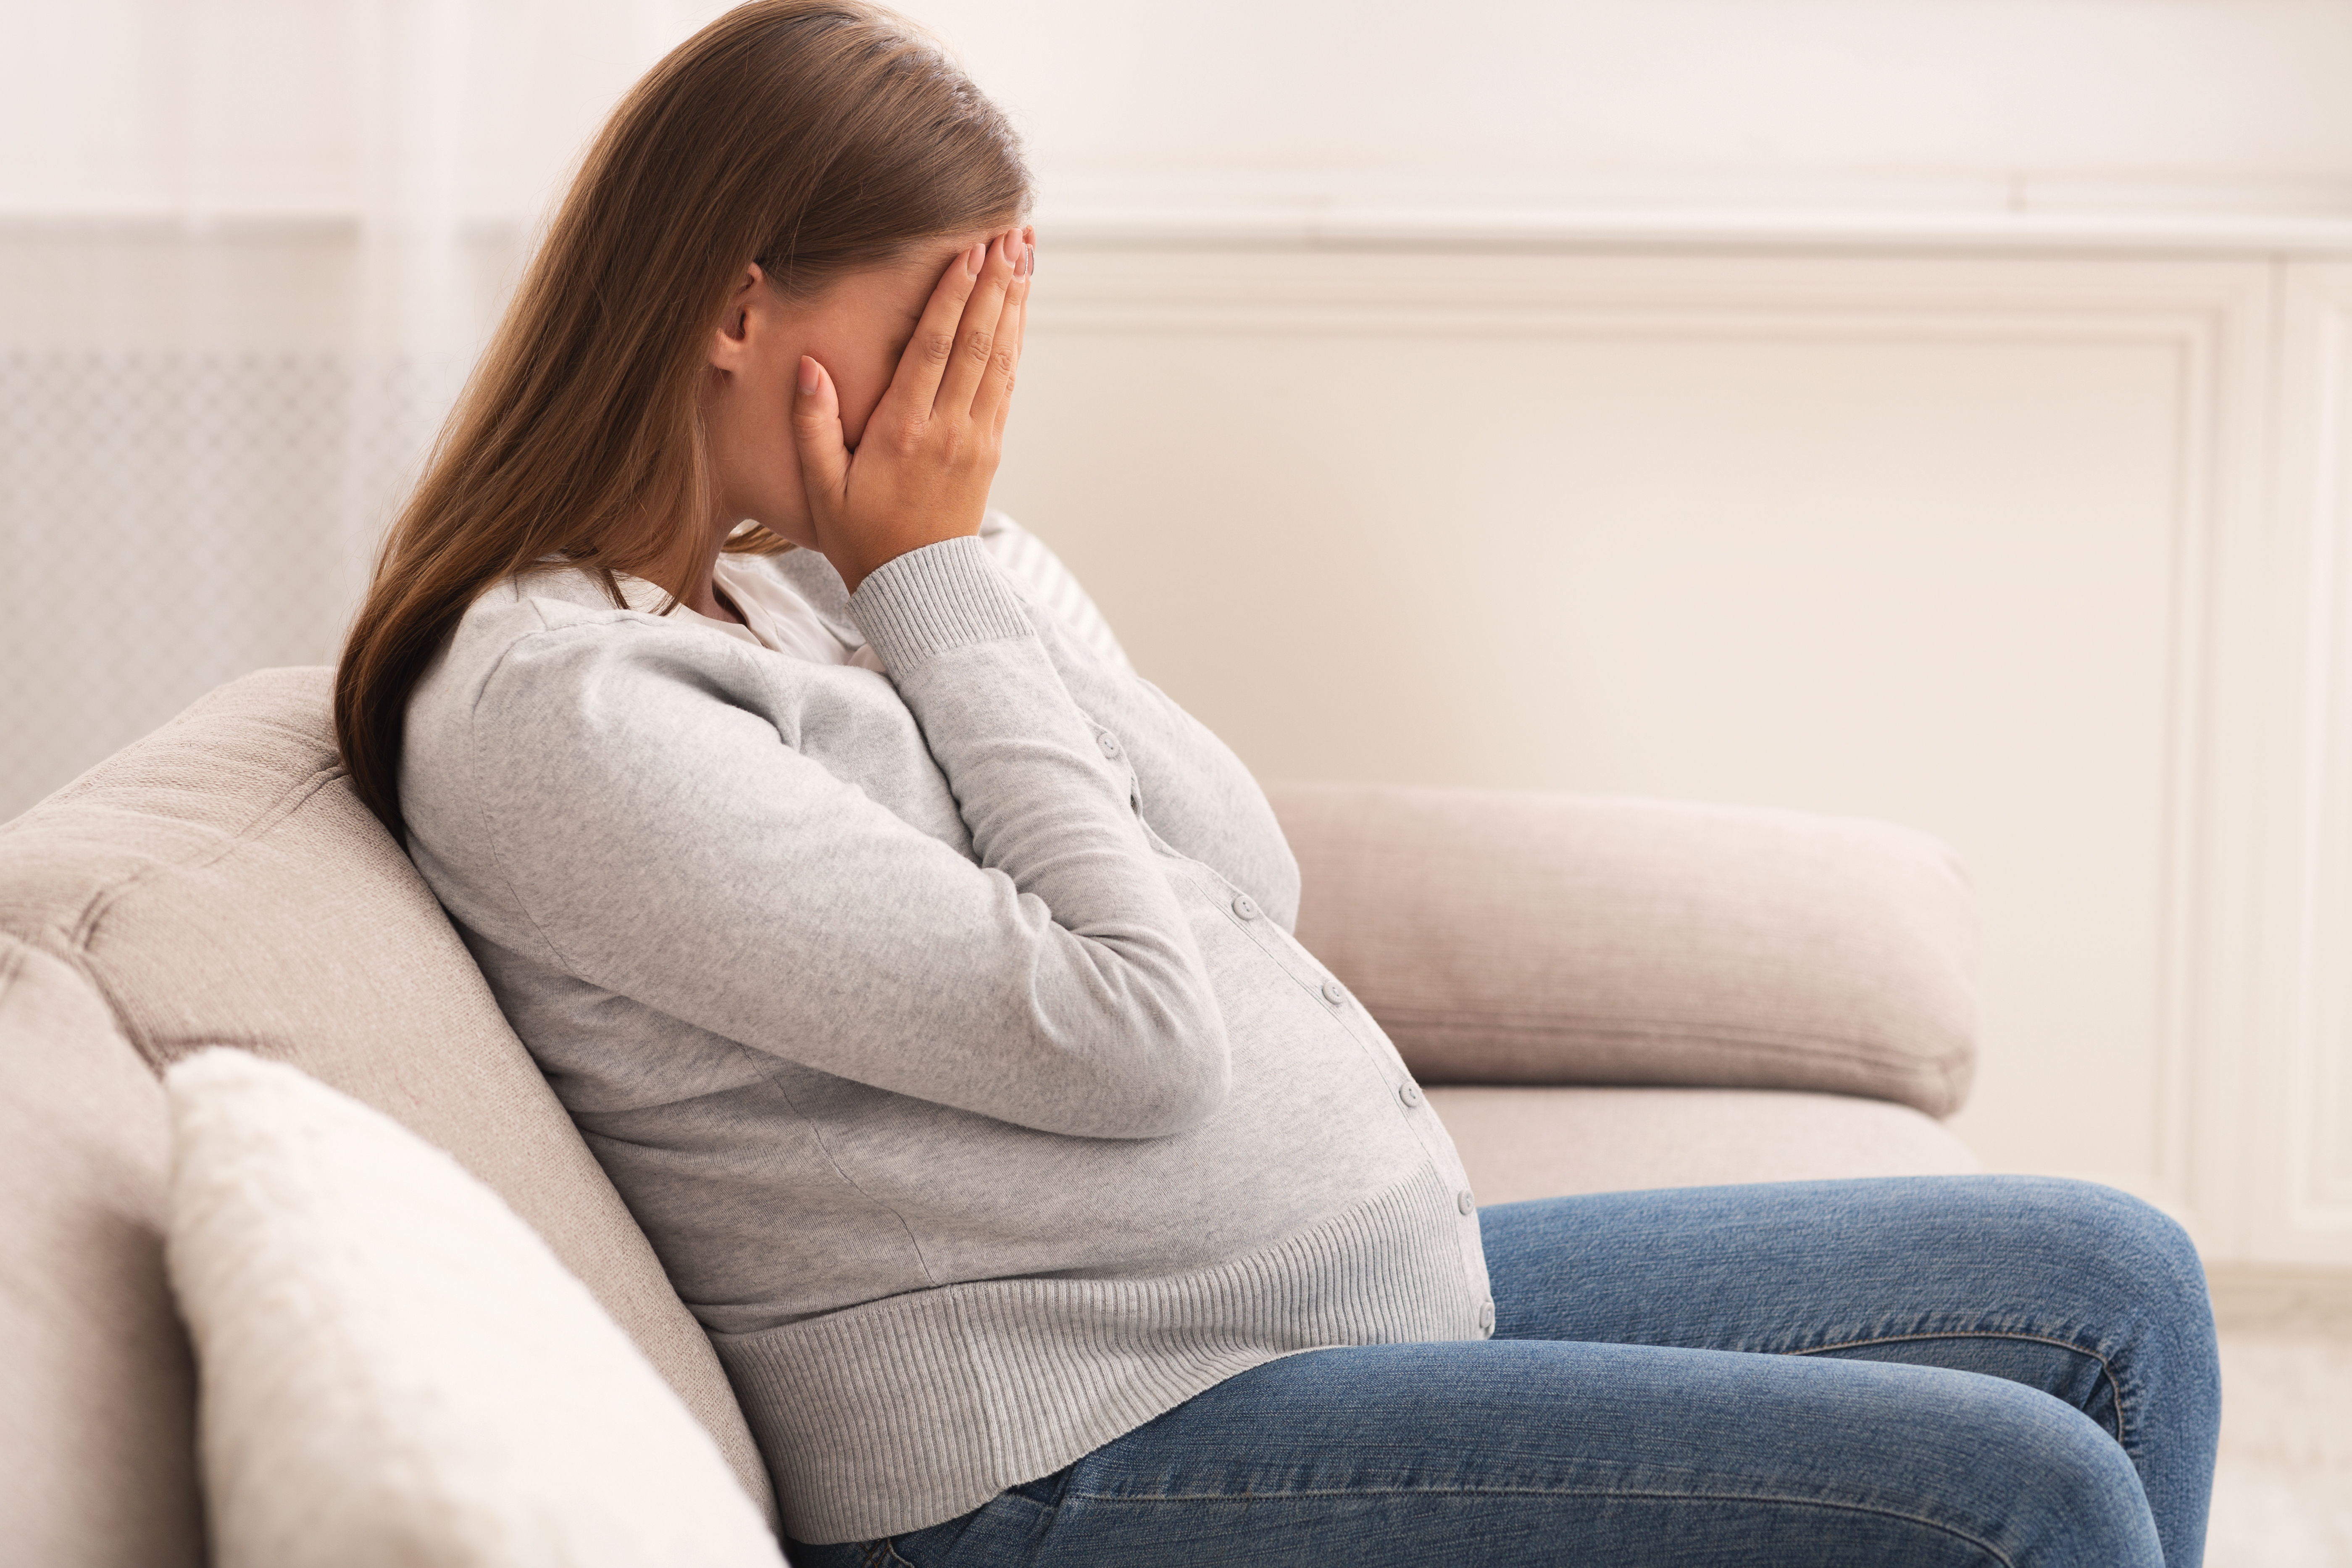 A stressed pregnant woman | Source: Shutterstock